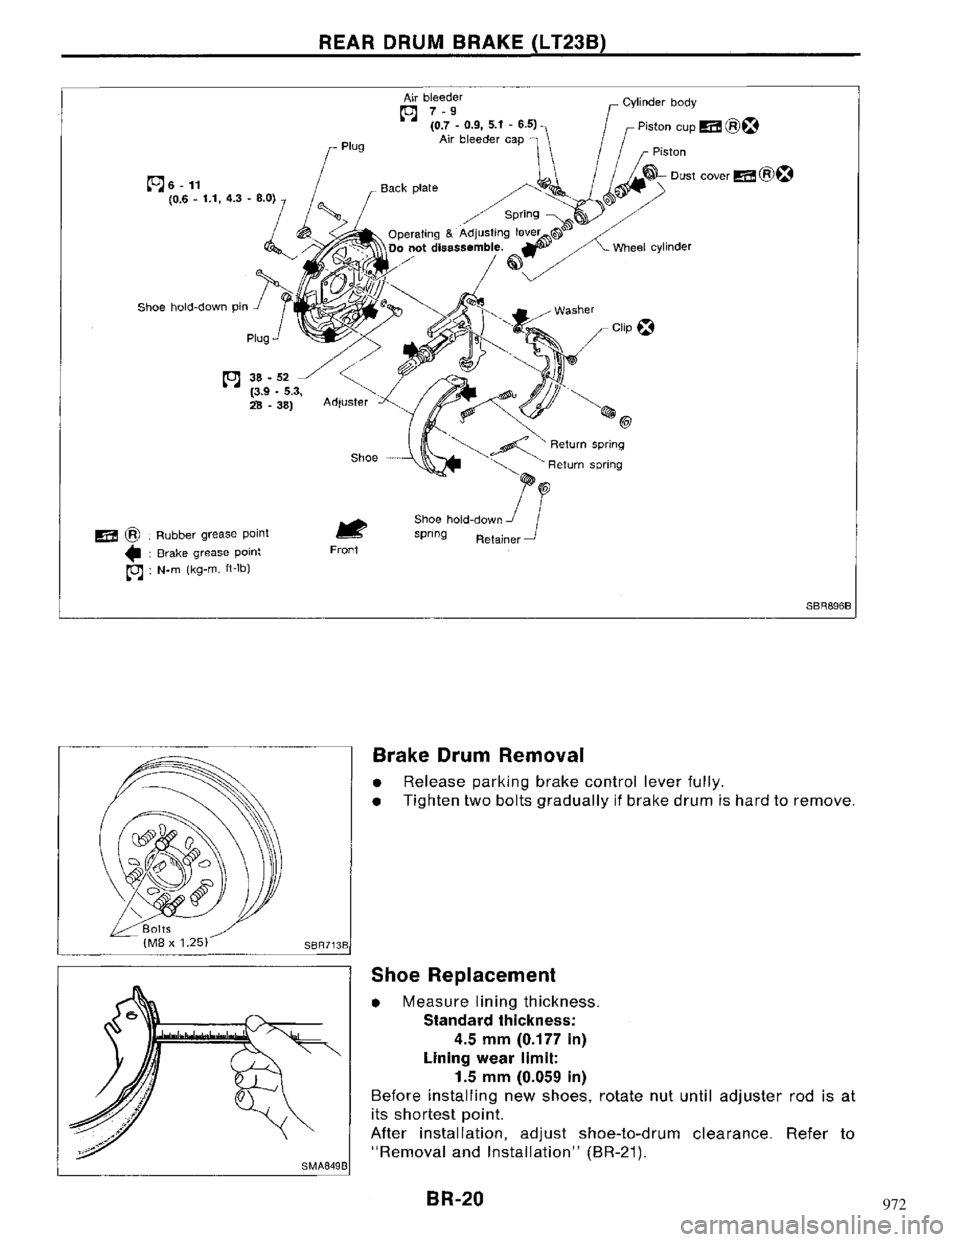 NISSAN MAXIMA 1994 A32 / 4.G Brake System User Guide 972 